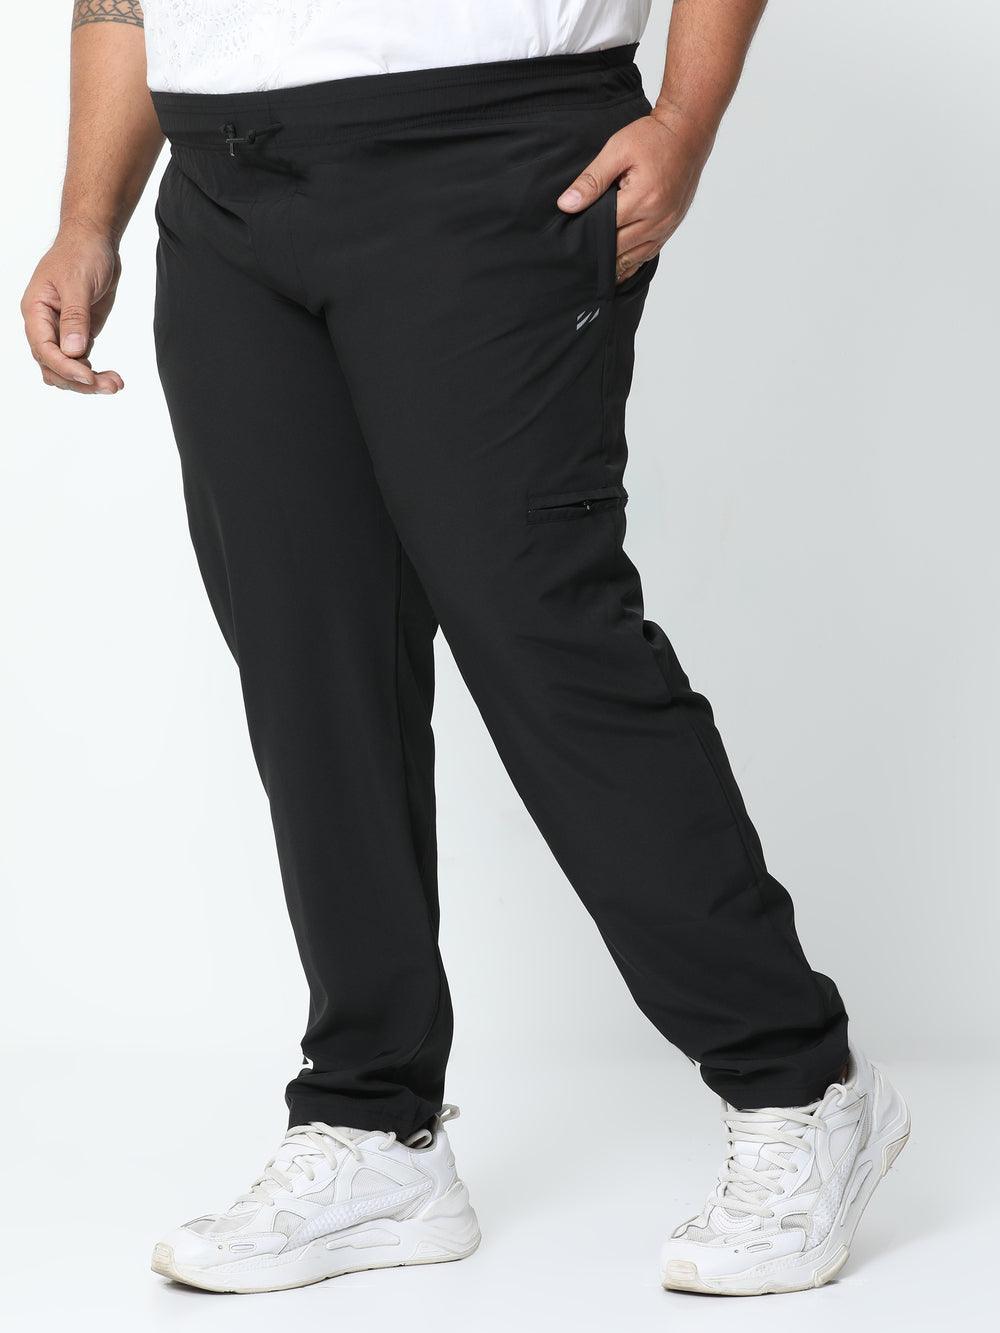 Spunk Men's Regular Fit Joggers : Amazon.in: Clothing & Accessories